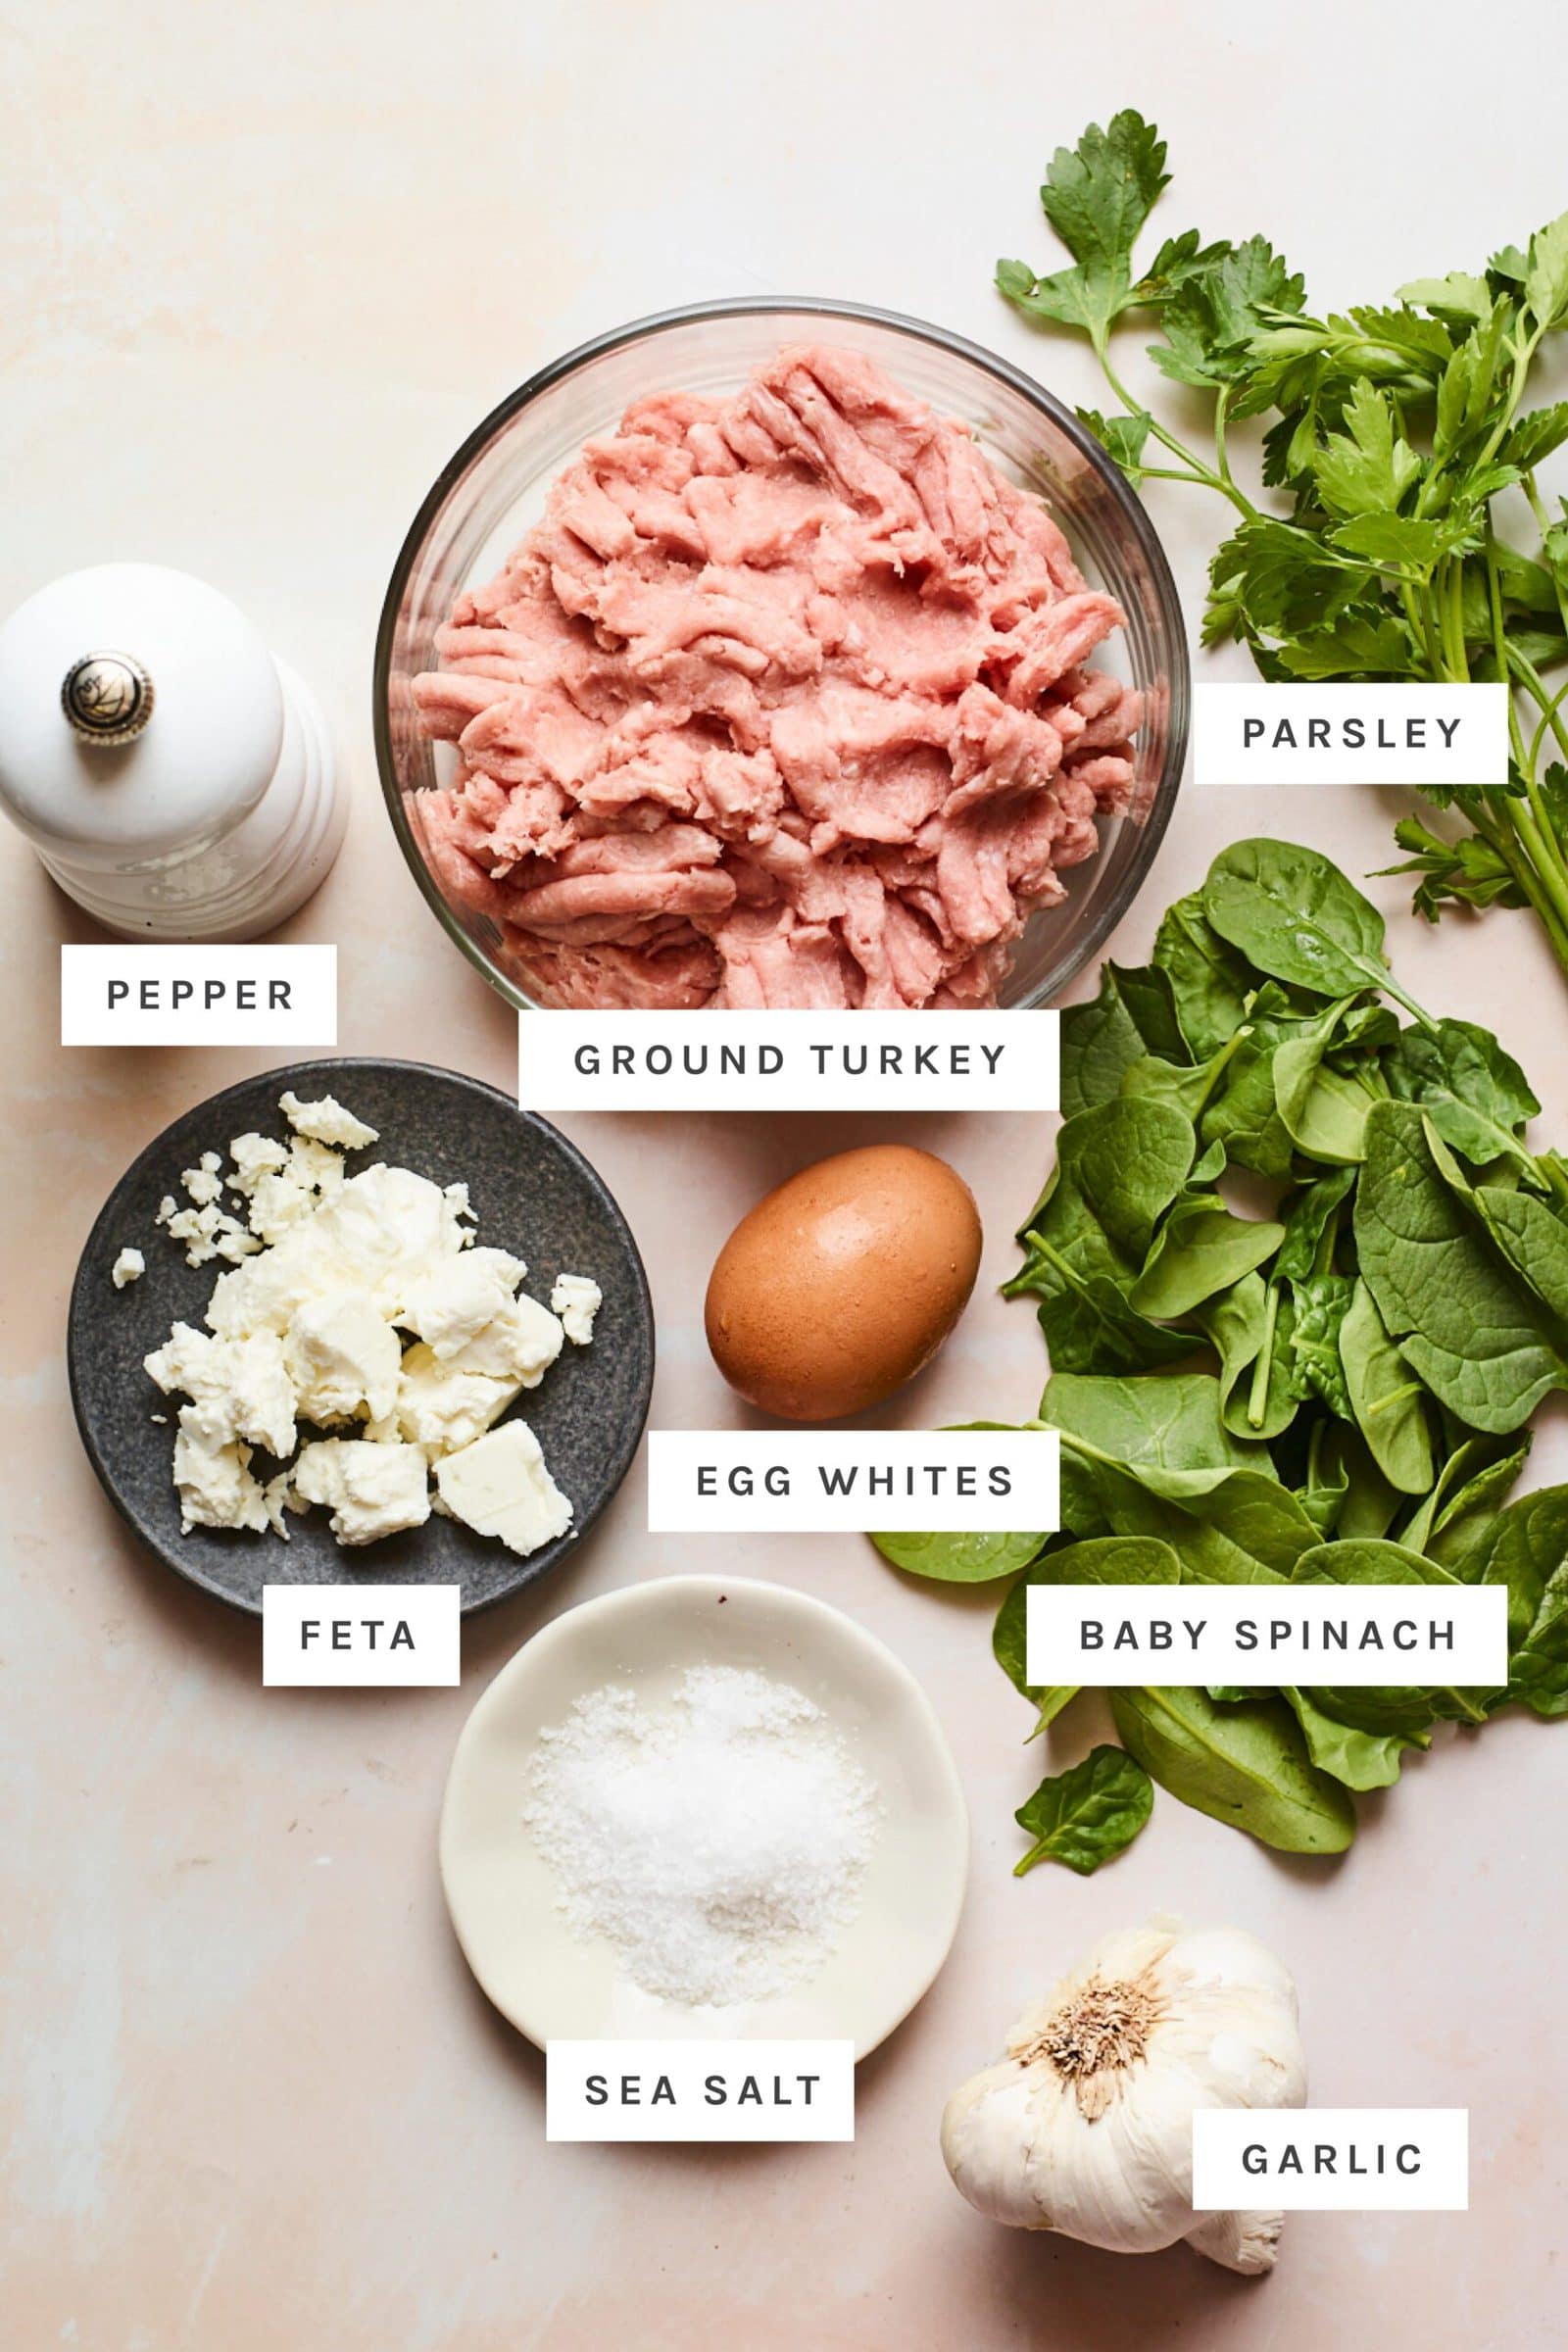 Ingredients for spinach and feta turkey burgers measured out.